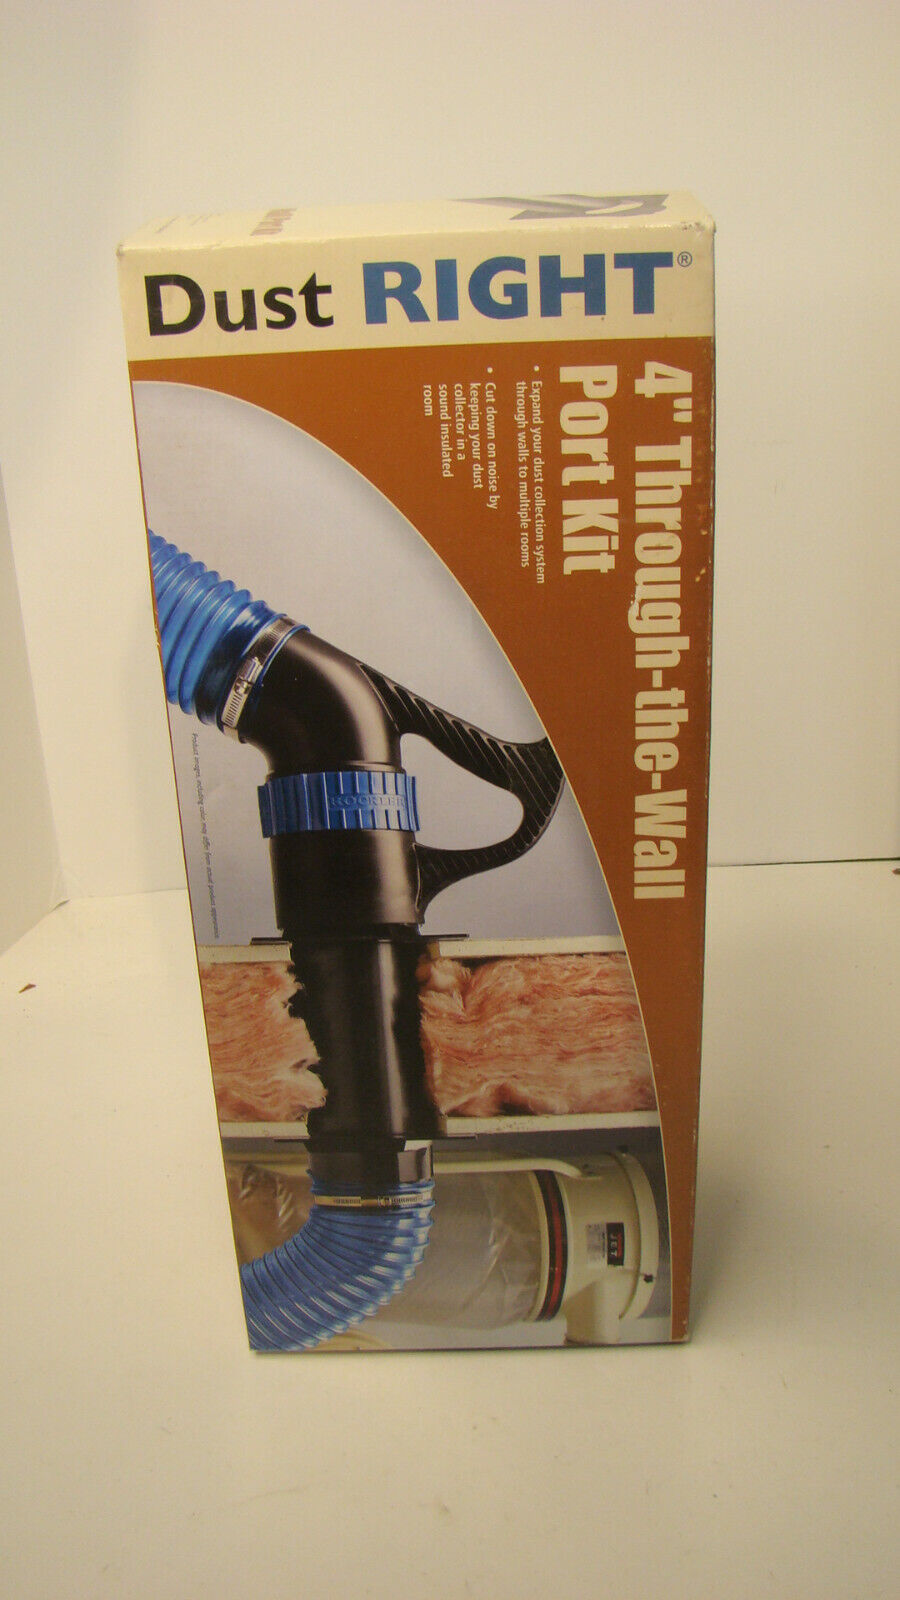 Dust Right 4" Through-the-wall Port Kit dust collection syst